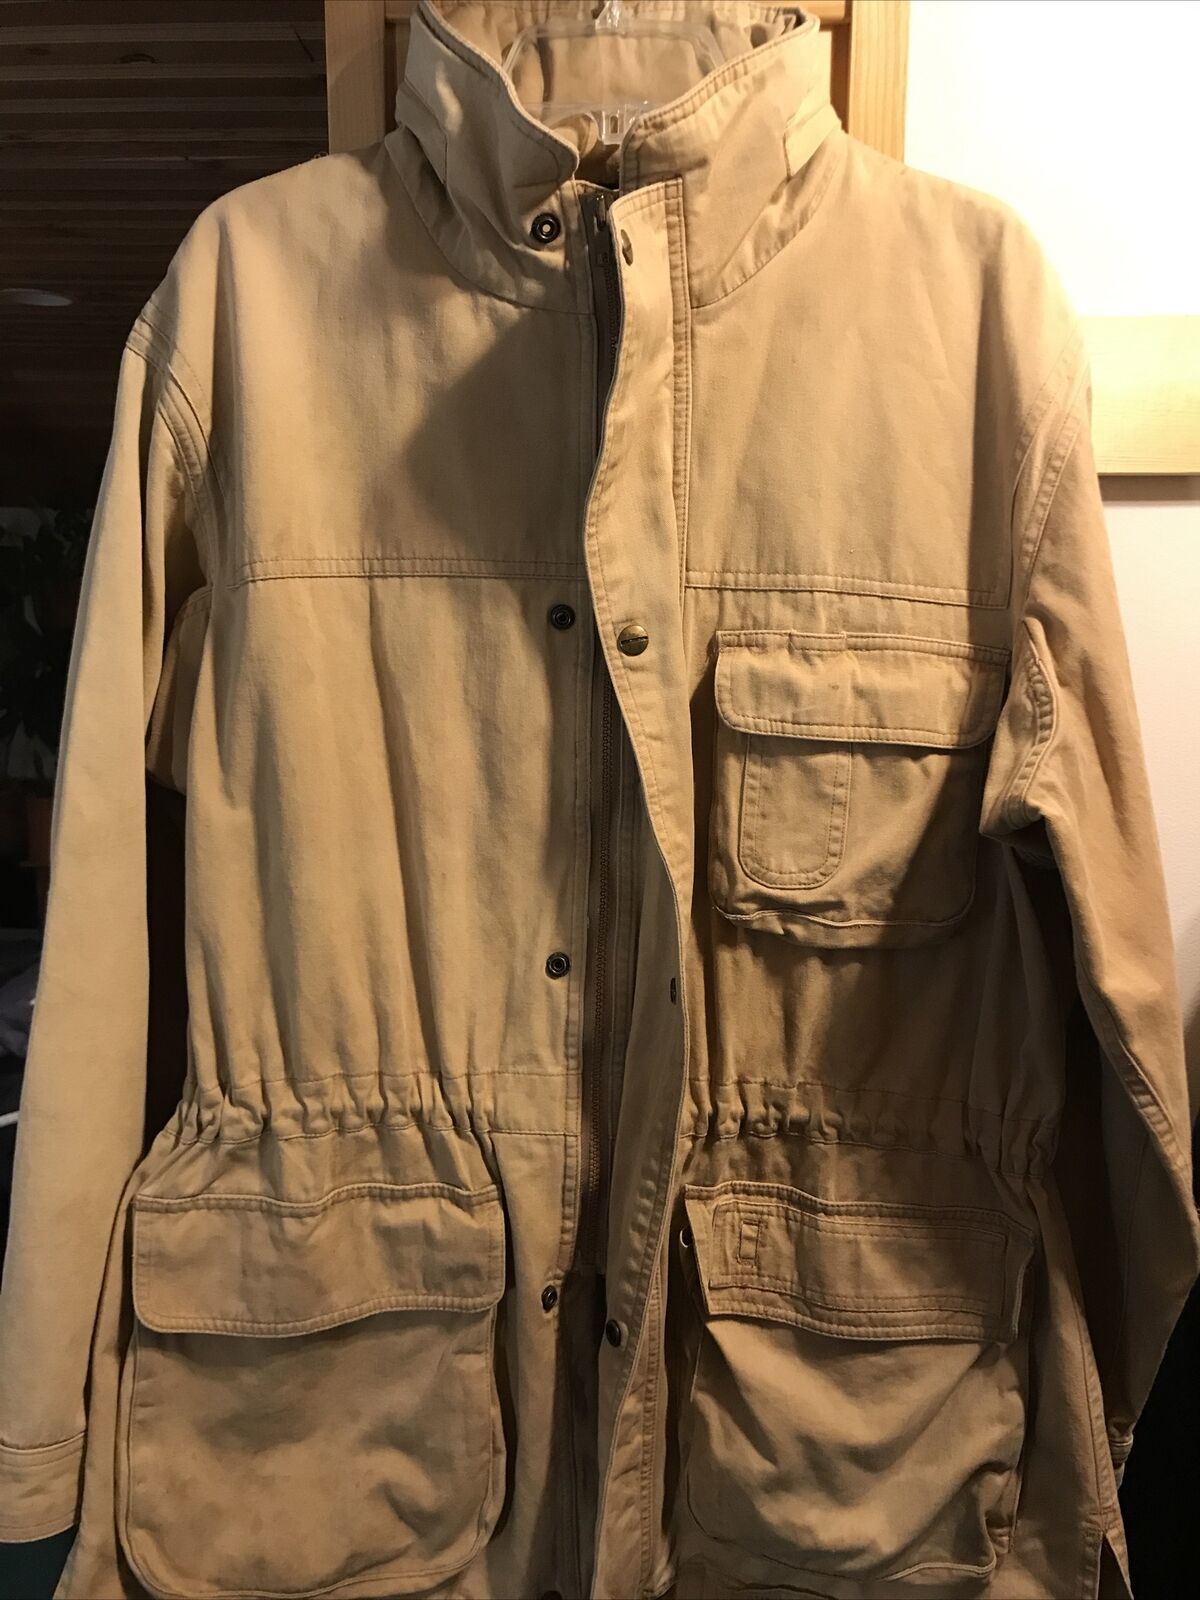 Primary image for Abercrombie & Fitch Vintage Mens L Tan Full Zip Long Sleeve Hooded Cotton Jacket